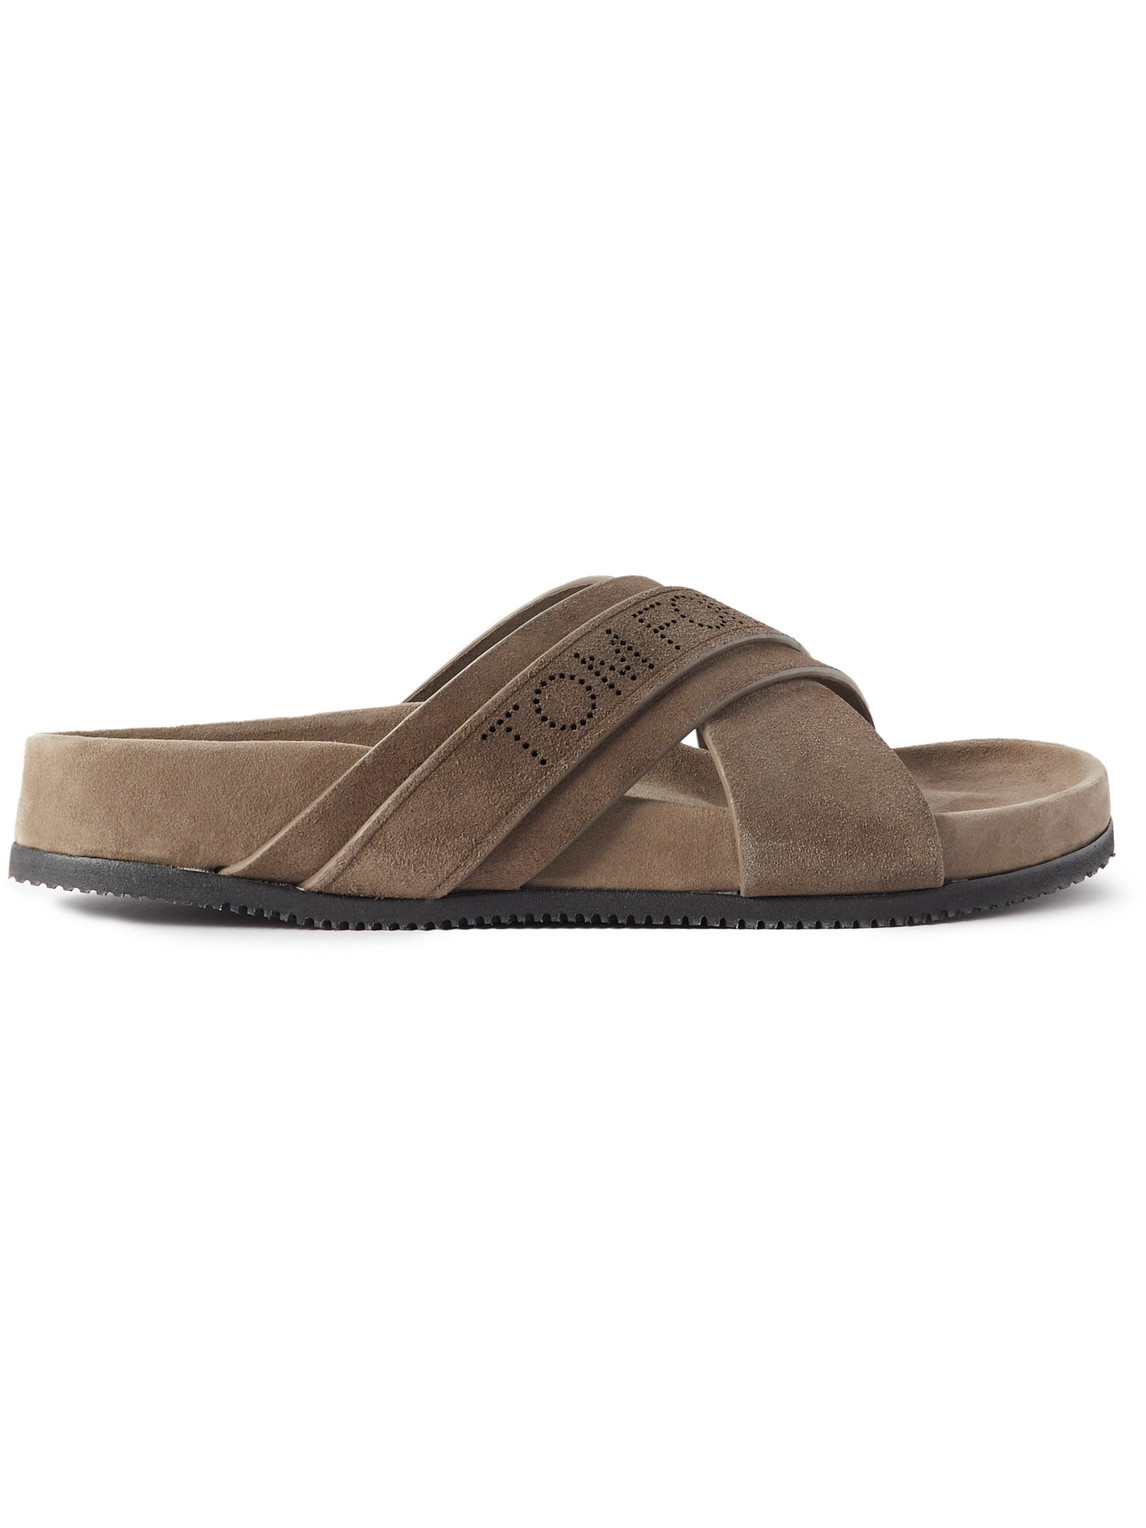 TOM FORD WICKLOW PERFORATED SUEDE SLIDES